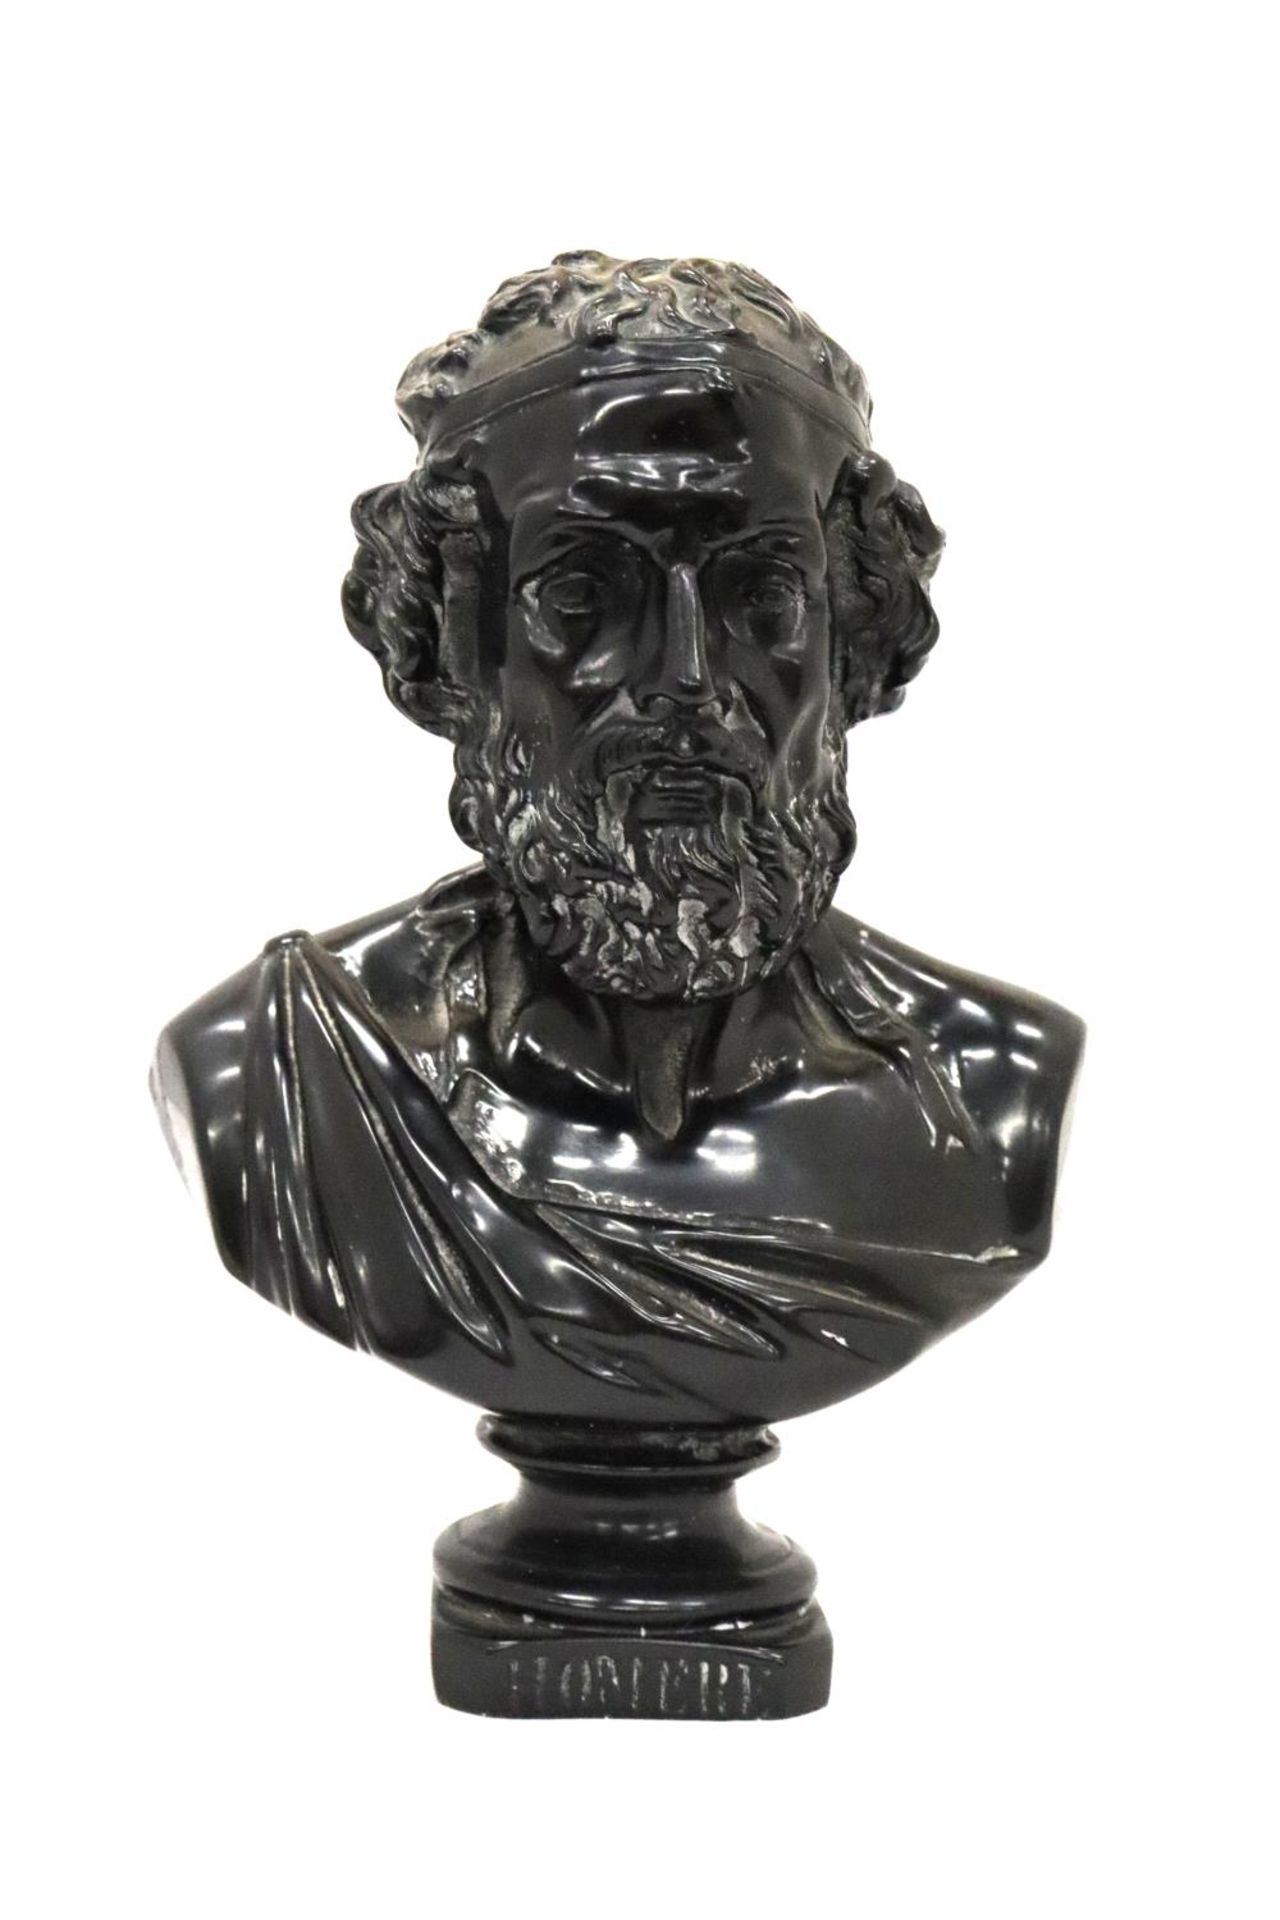 A HEAVY RESIN BUST OF CLASSICAL GREEK POET TITLED - 'HOMERE', HEIGHT 30 CM